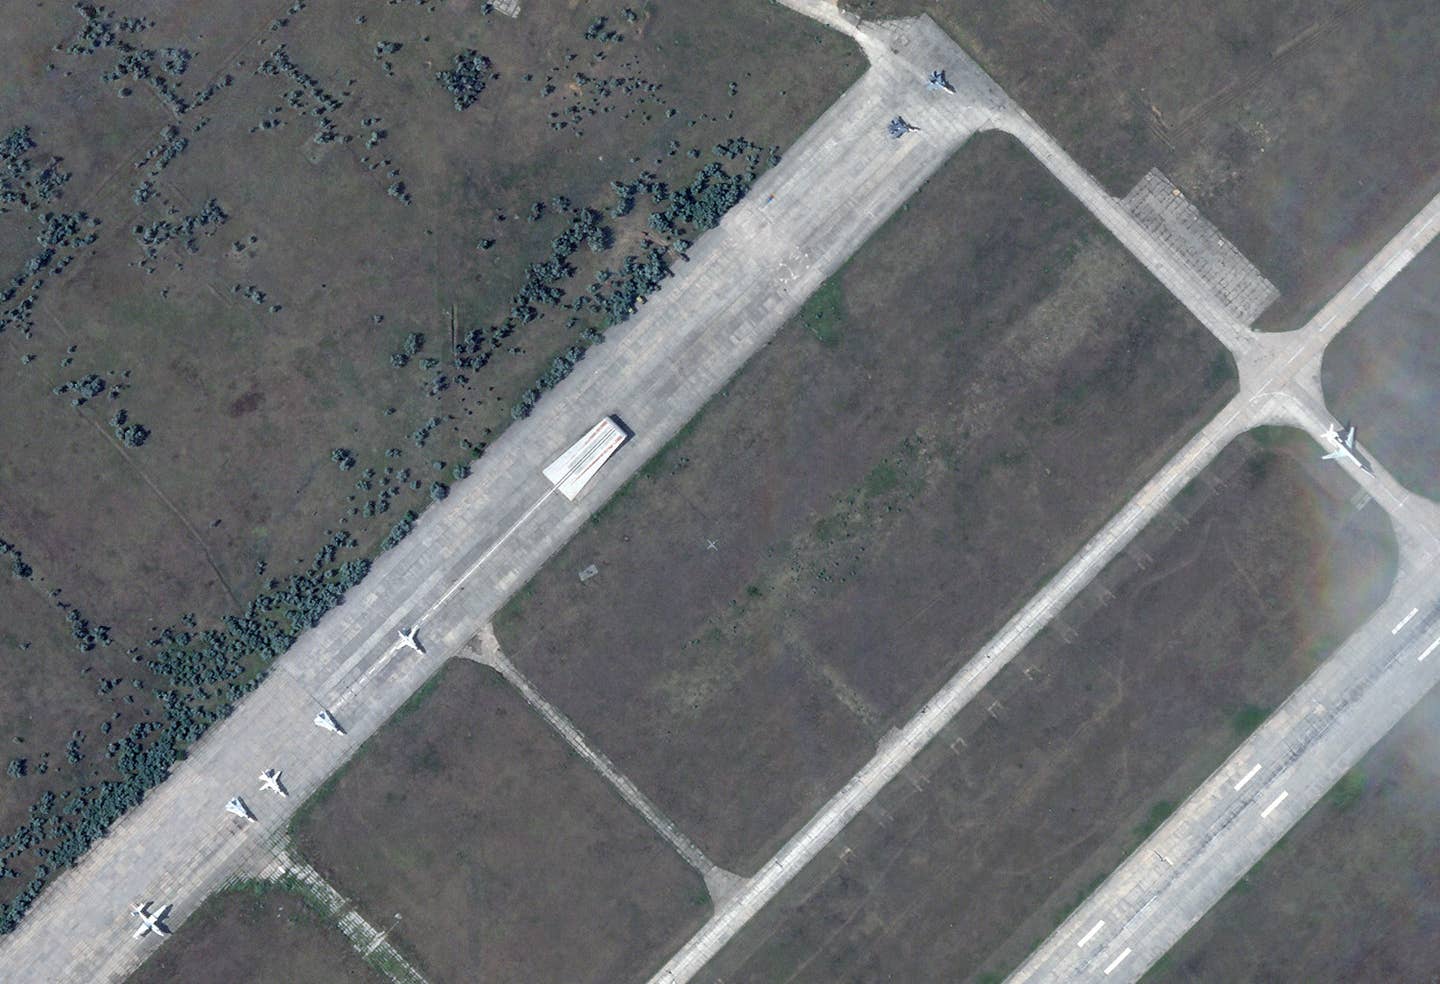 Various aircraft at the northeastern end of Saki Air Base, including the Tu-134UBL at far right, all of which appear at least superficially to be undamaged. Also visible here is a ski jump used in the past for land-based training and testing related to operations from Russia's lone aircraft carrier, the short take-off, barrier-arrested recovery (STOBAR) configured <em>Admiral Kuznetsov</em>. <em>PHOTO © 2022 PLANET LABS INC. ALL RIGHTS RESERVED. REPRINTED BY PERMISSION</em>